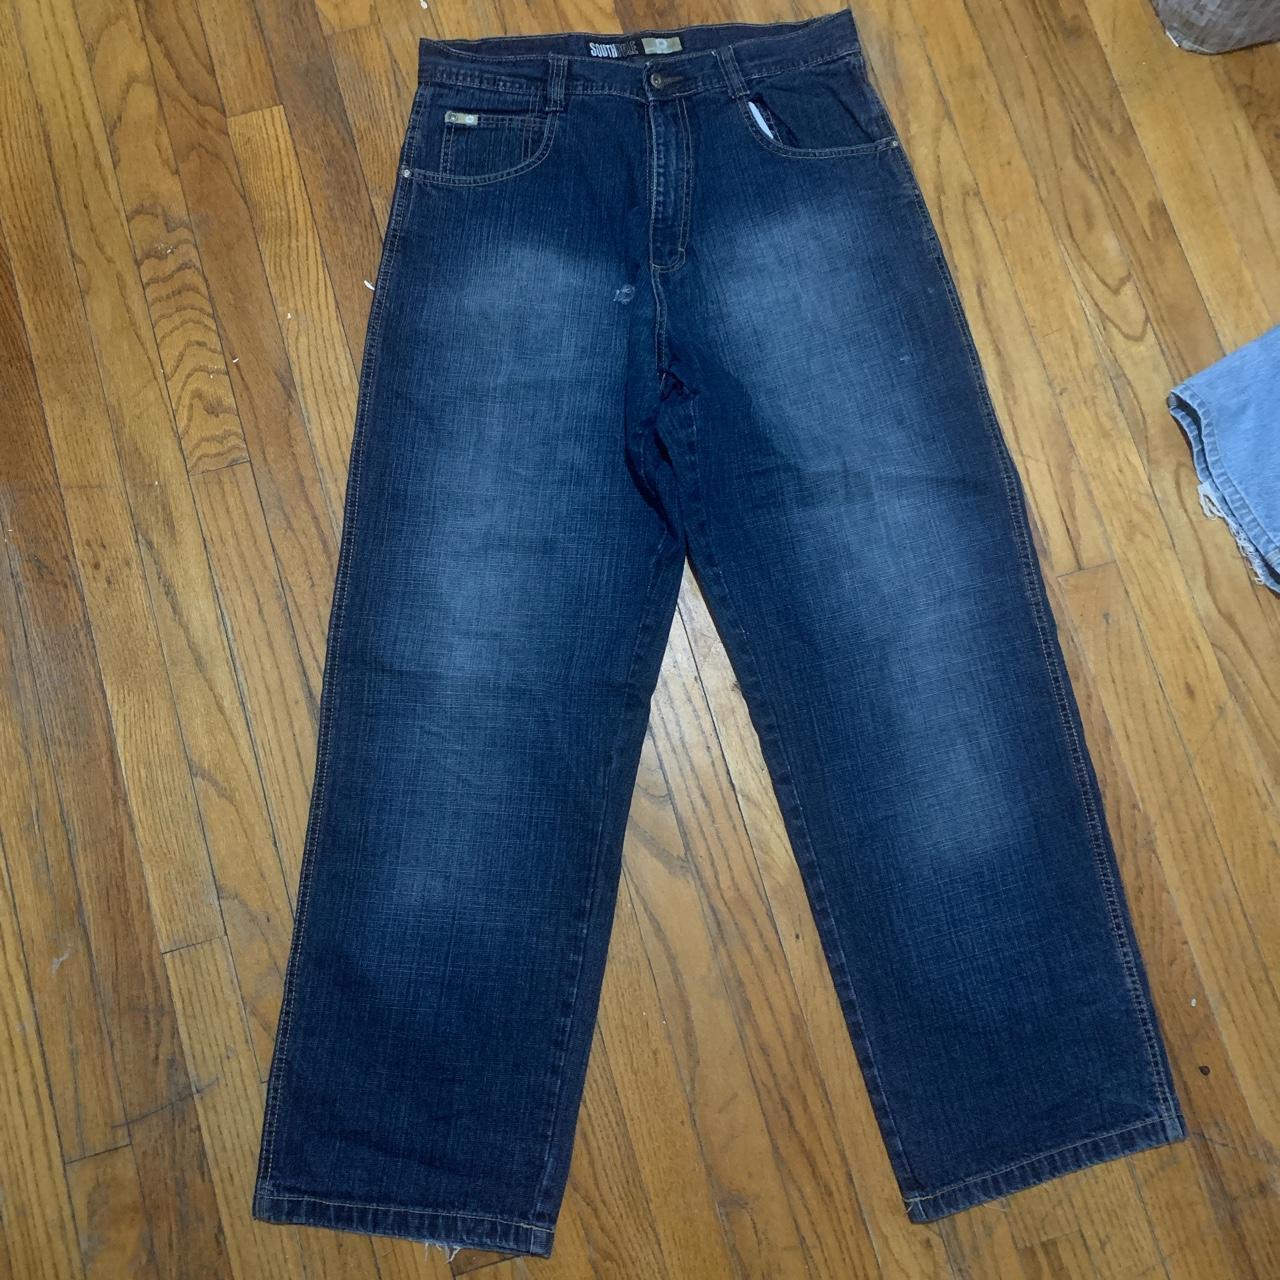 Super sick south pole jeans these fit baggy dark... - Depop